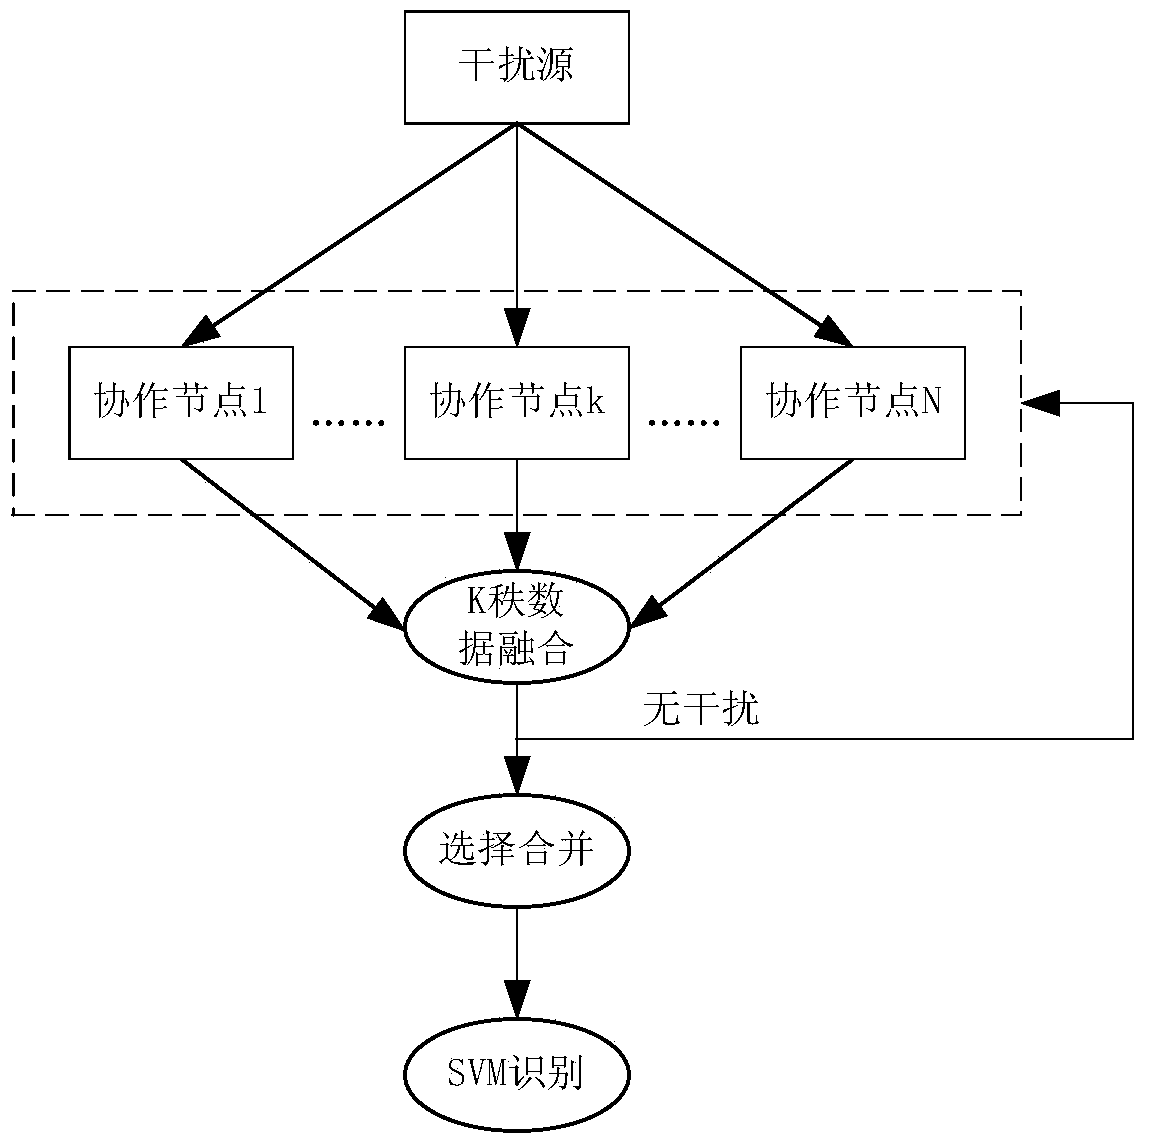 Cooperative interference detection method based on support vector machine